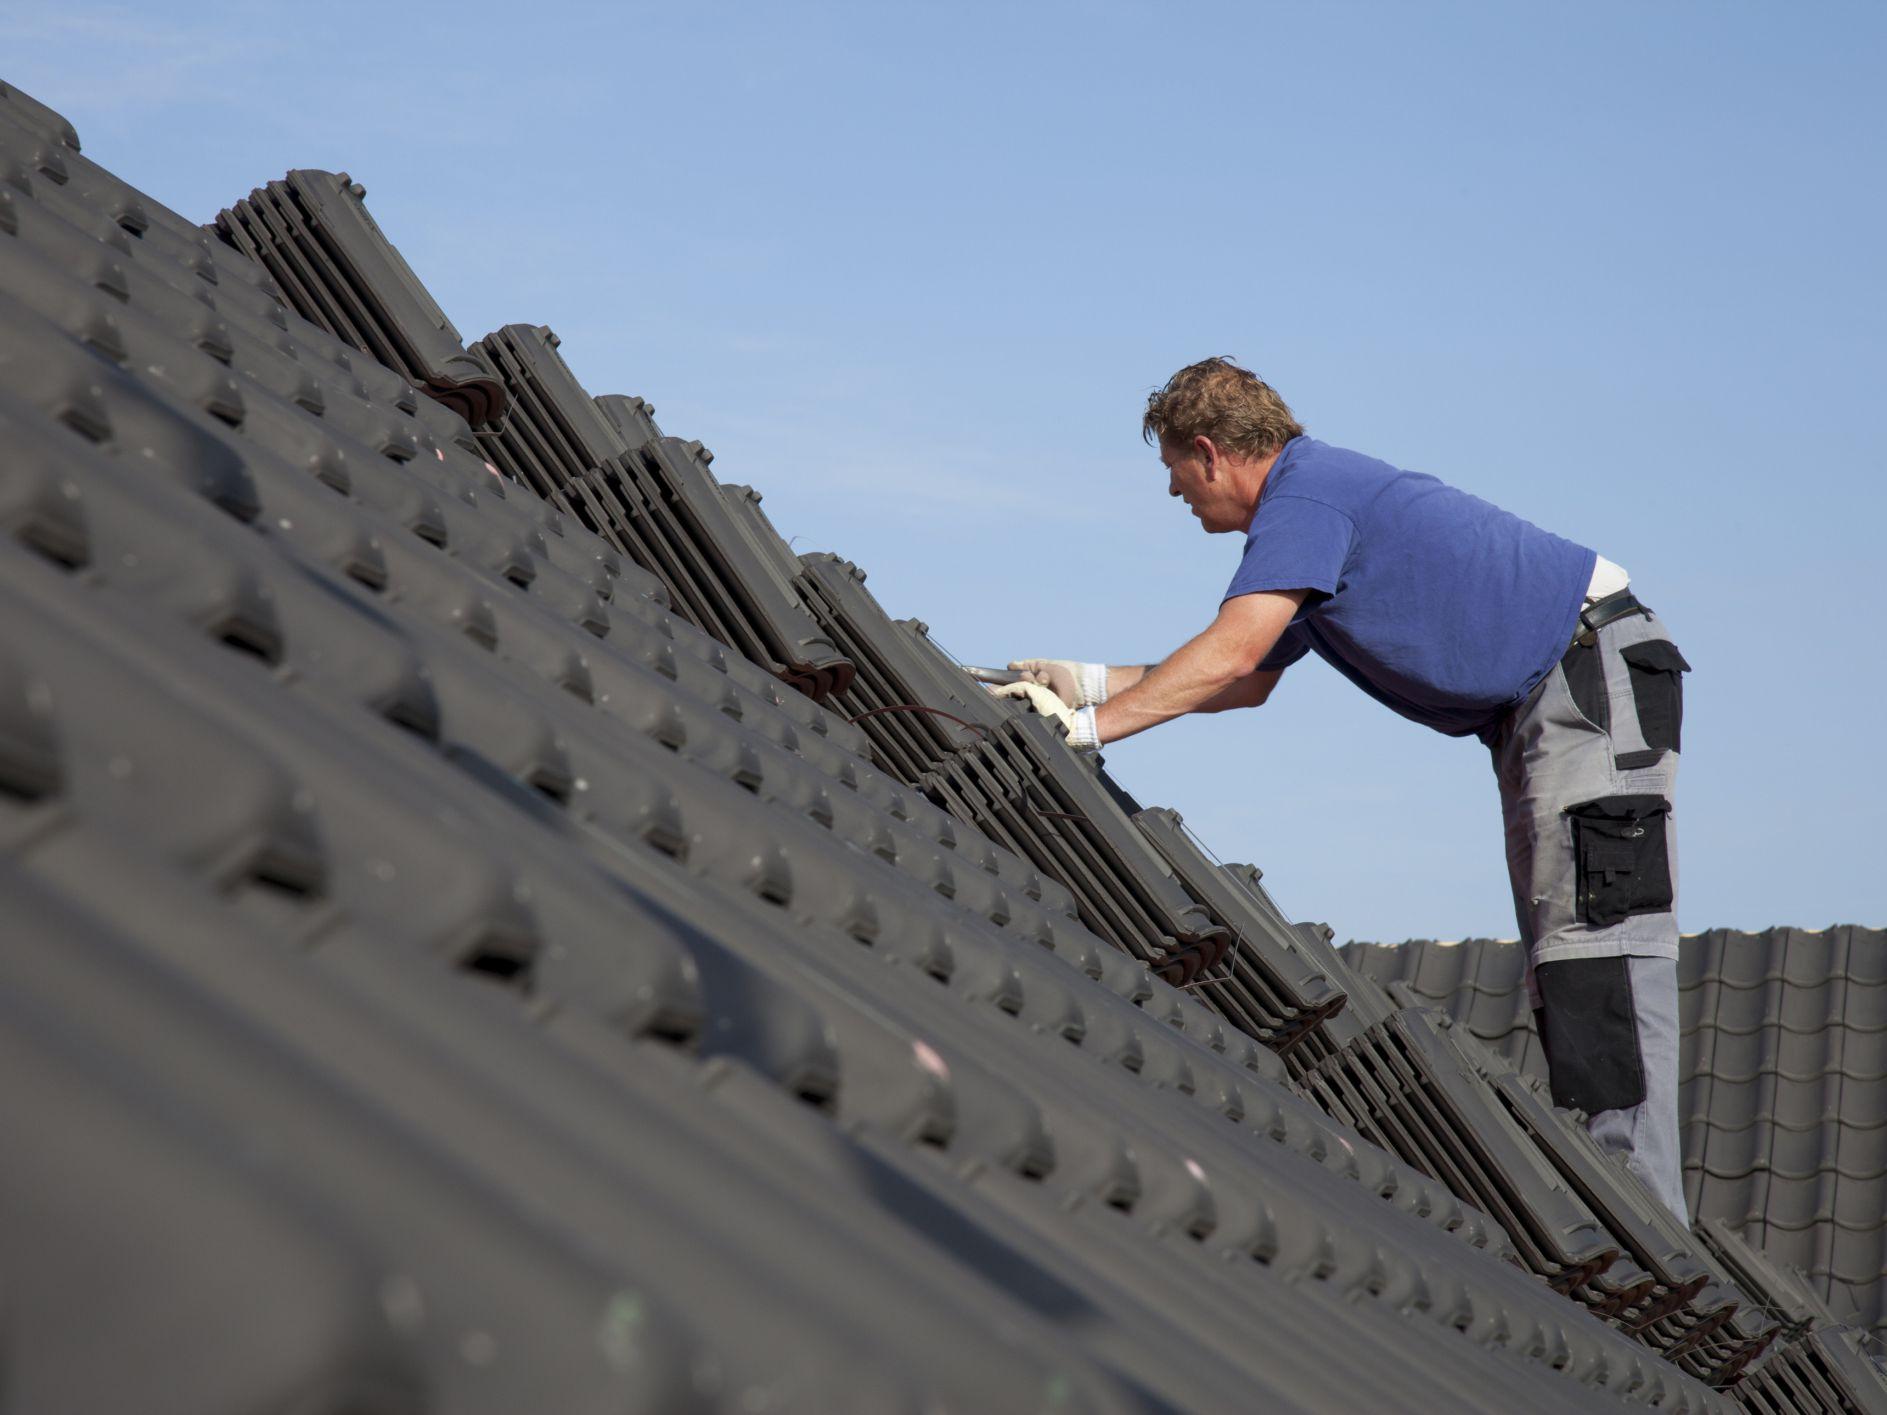 Choosing A Roofing Material For Your Home